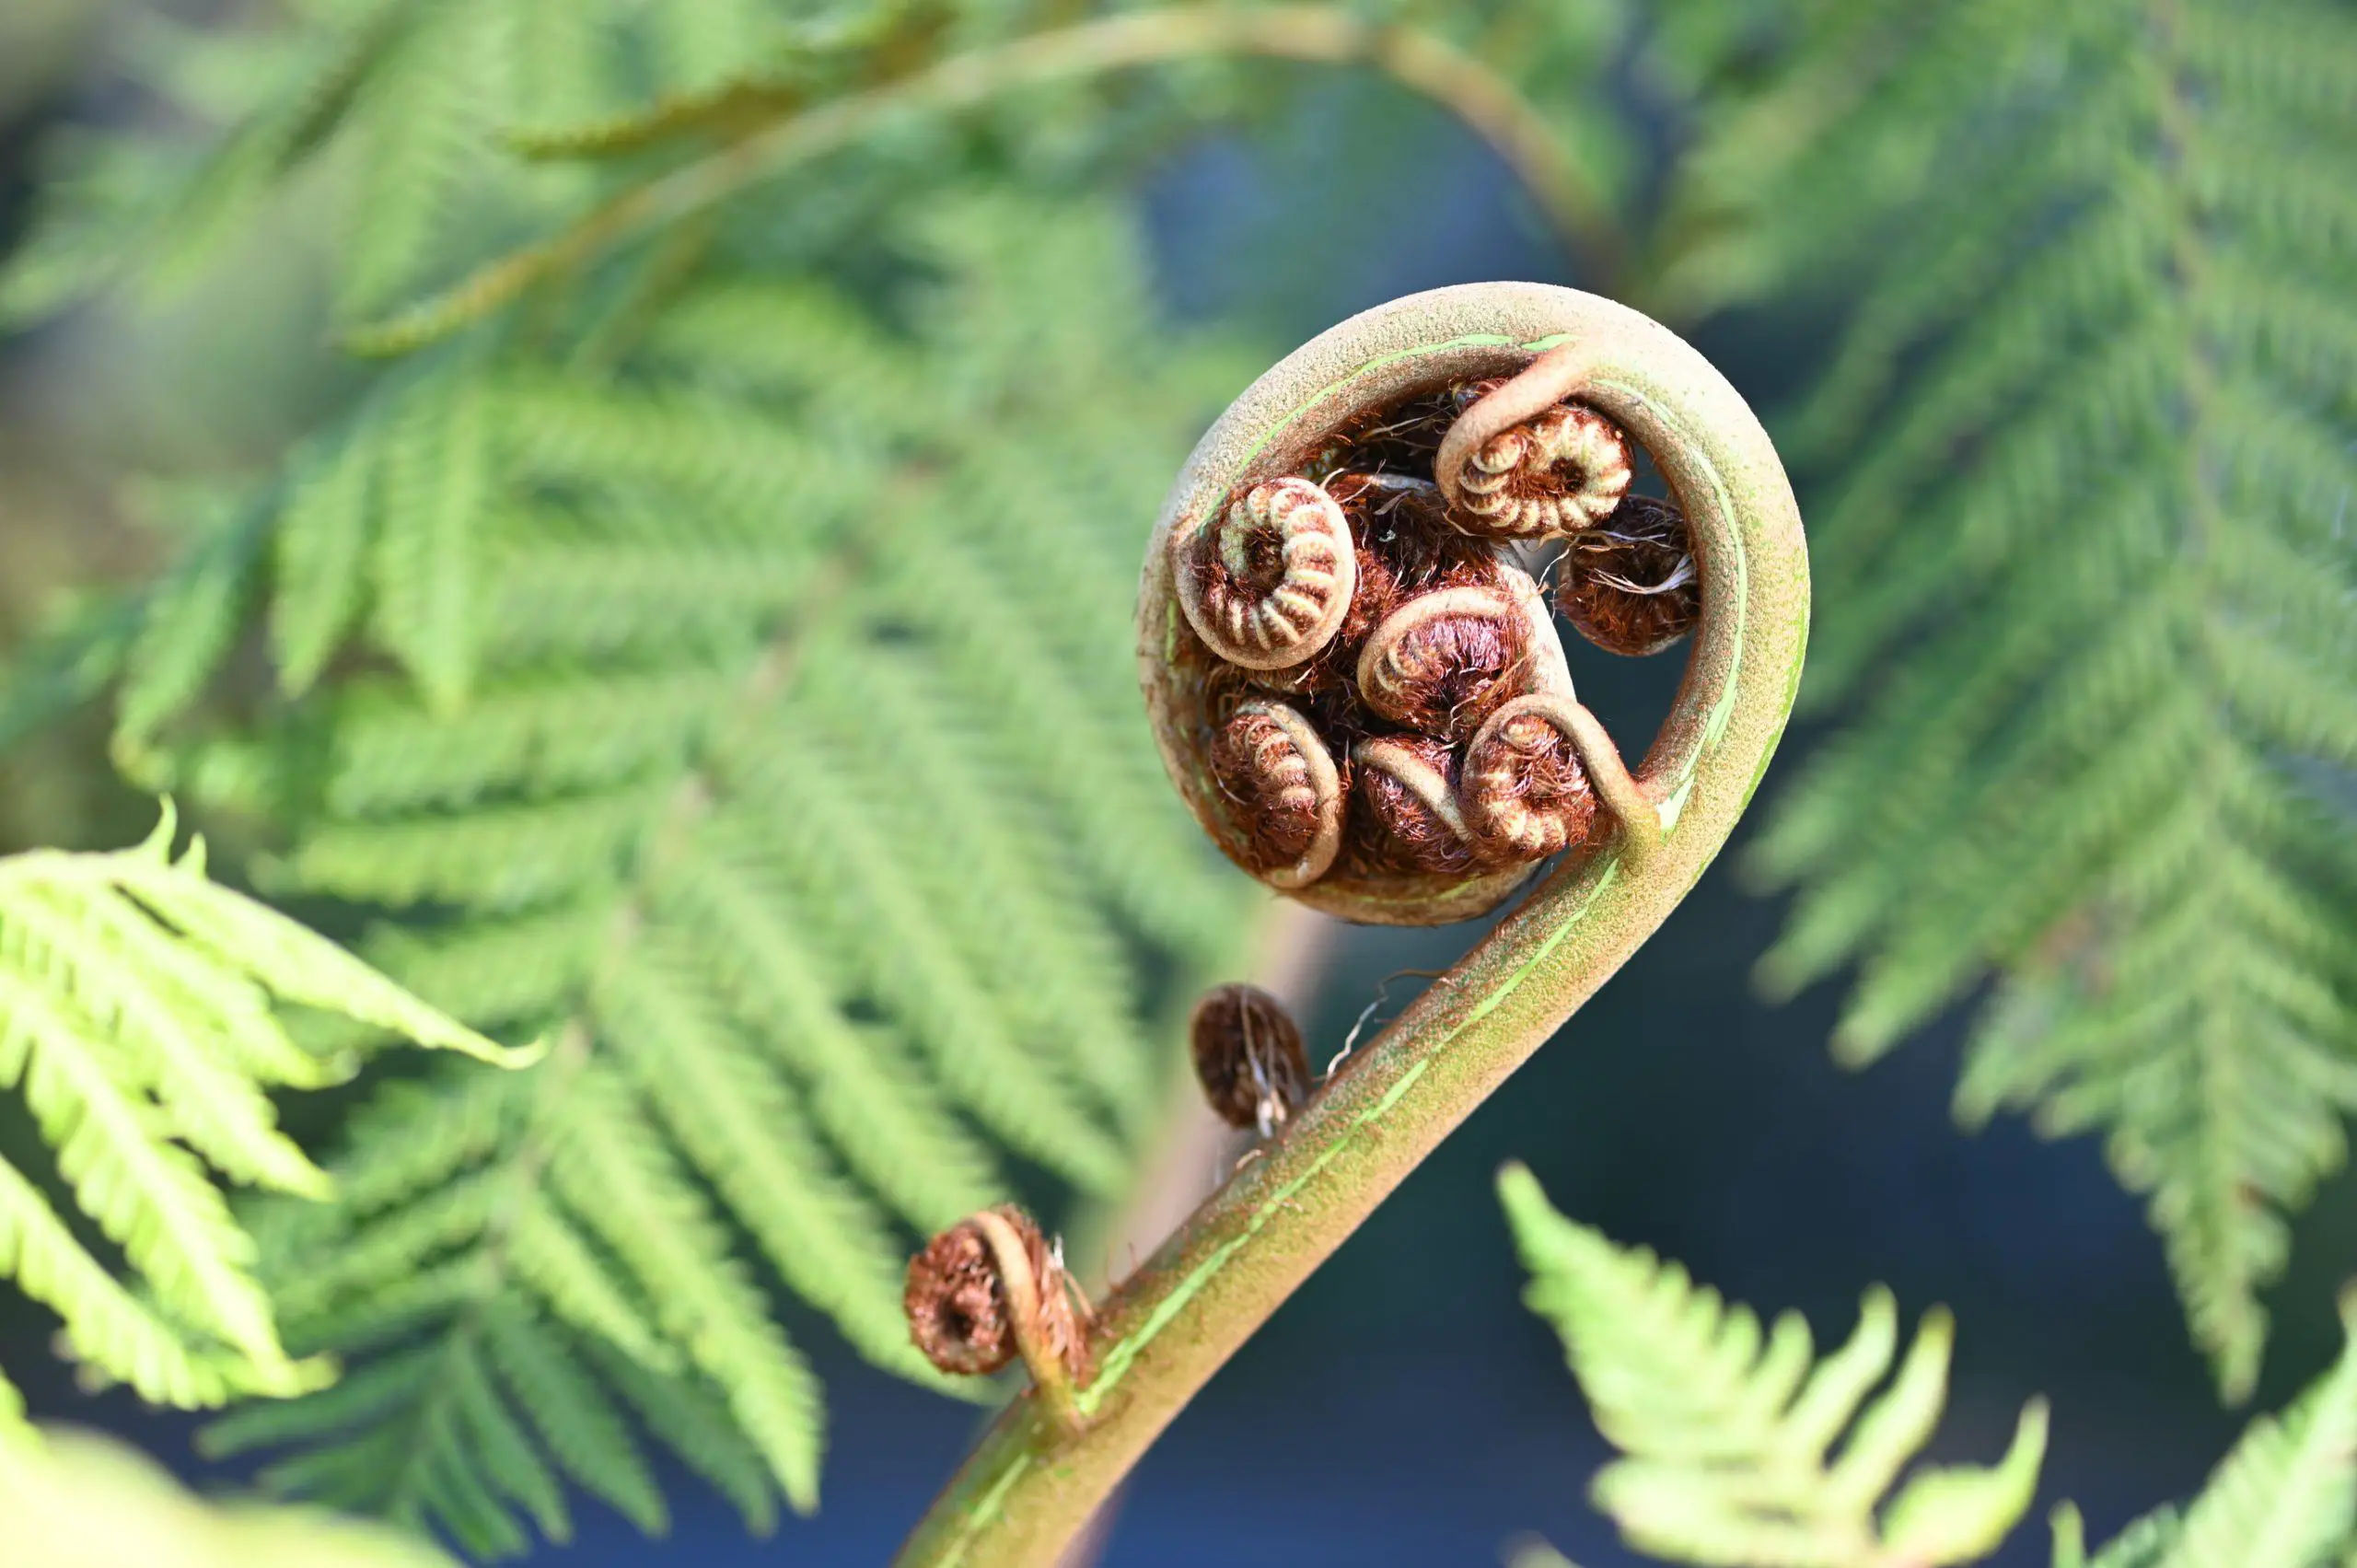 Some types of ferns have been shown promising at removing toxins from the air or water